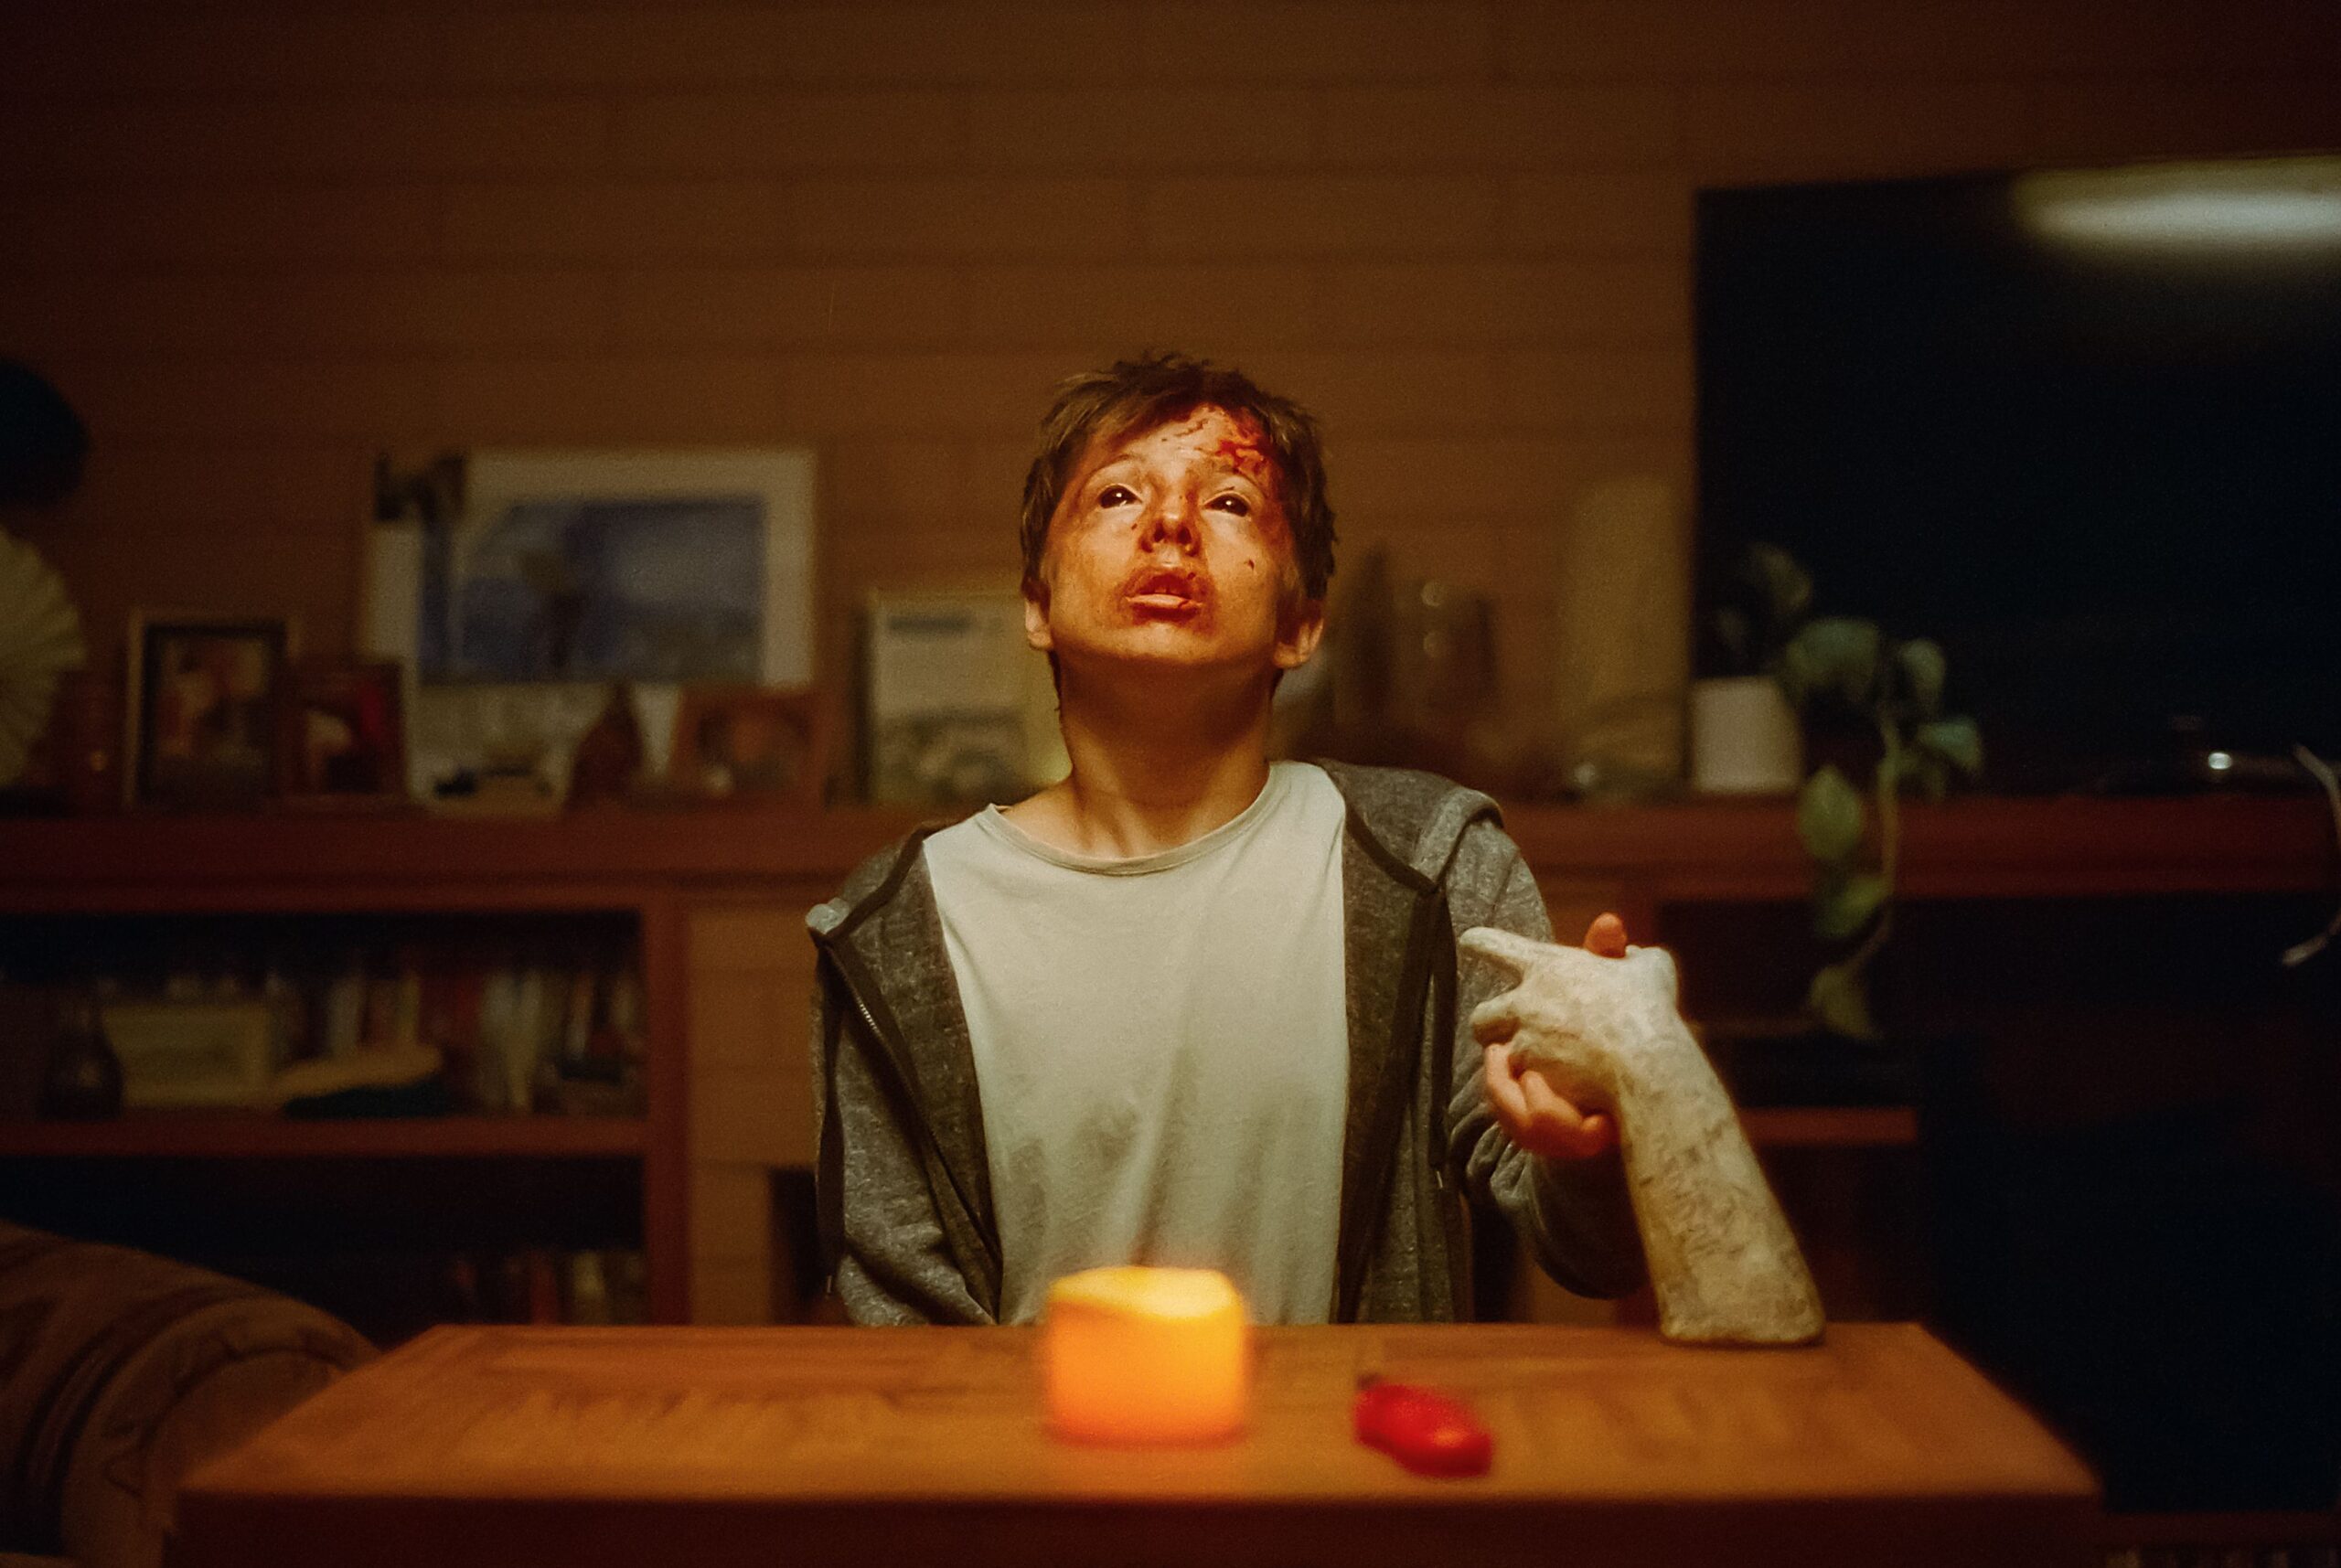 Joe Bird in Danny and Michael Philippou's supernatural horror, Talk to Me, distributed by A24